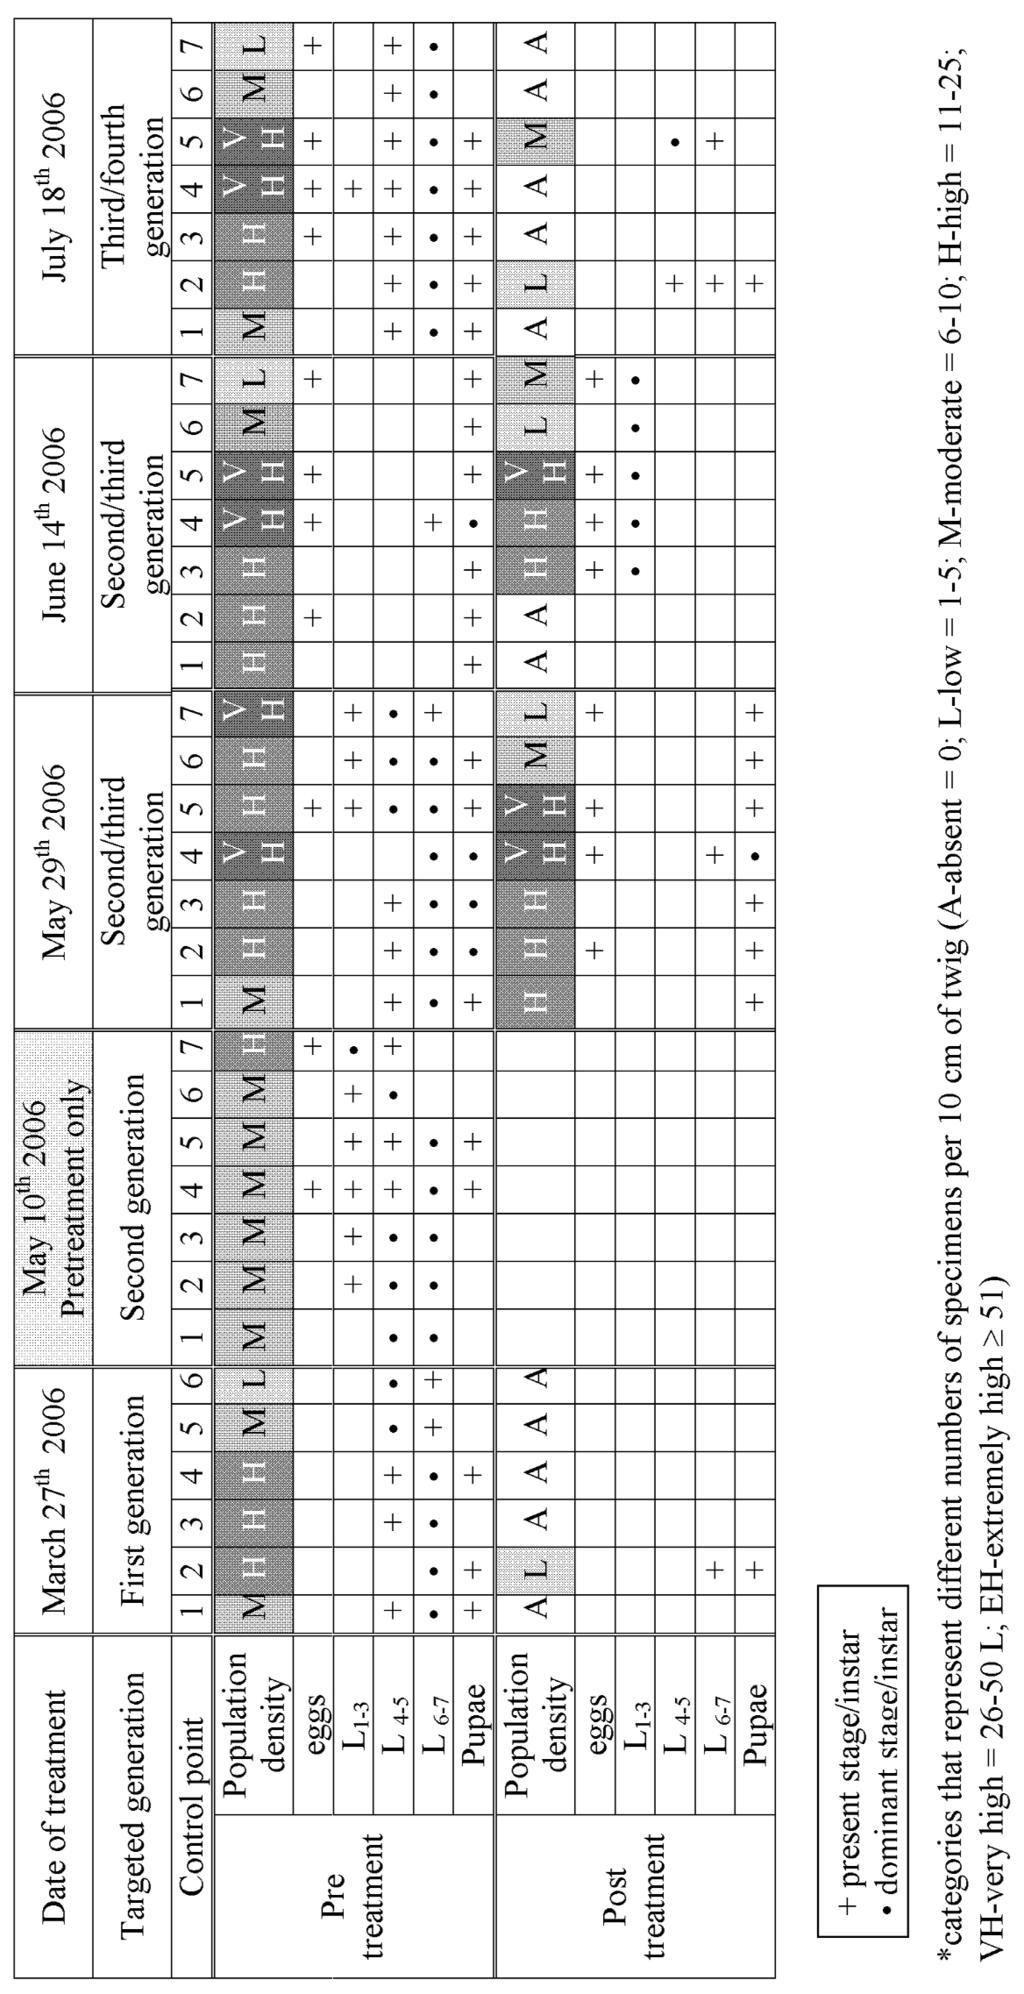 Table 2. Population density and age composition of immature stages of S.